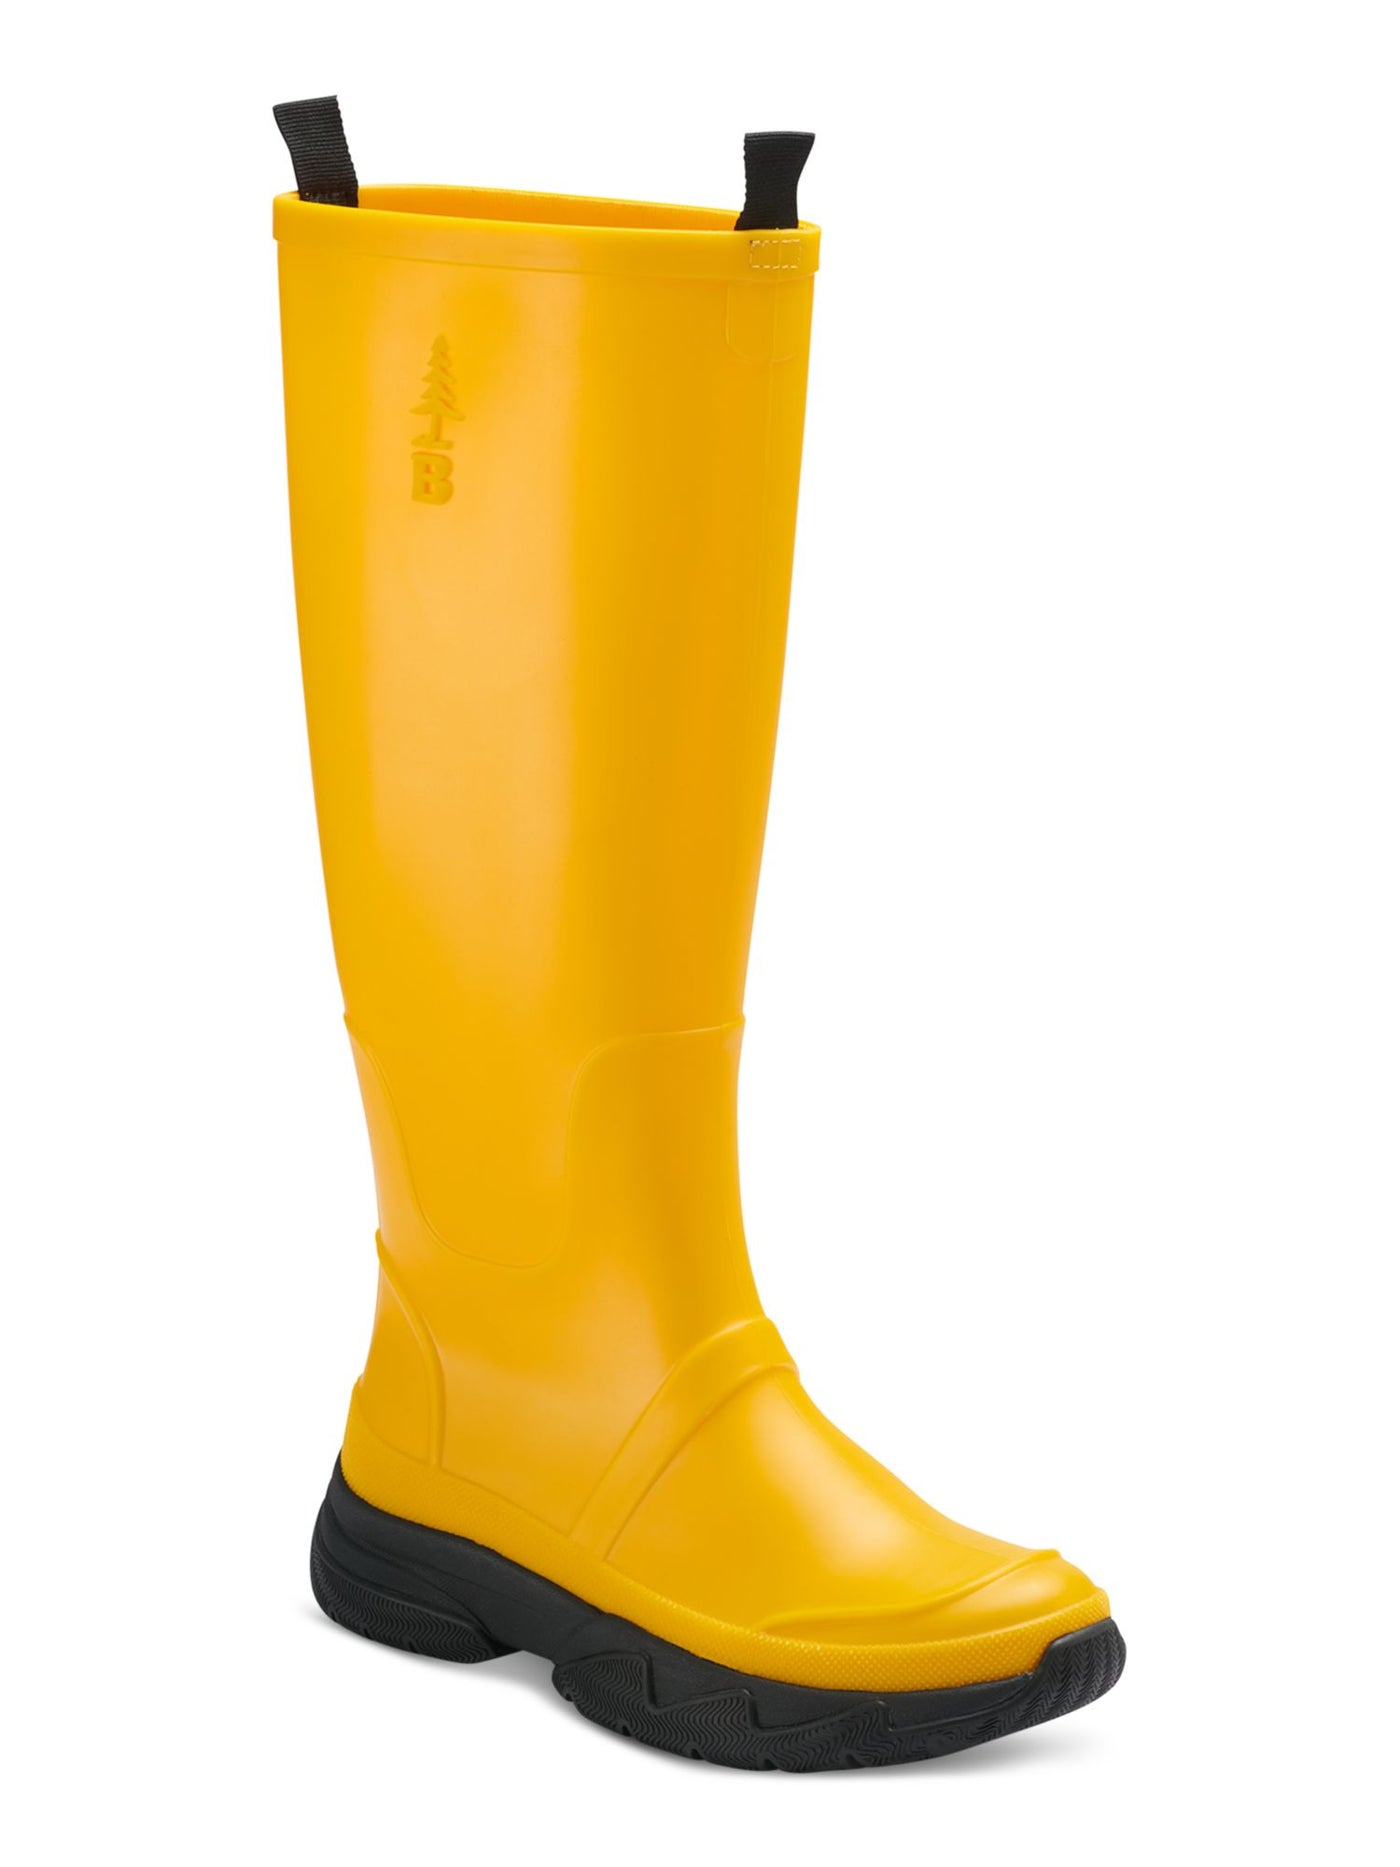 BASS OUTDOOR Womens Yellow Waterproof Cushioned Removable Insole Field Round Toe Rain Boots 8 M